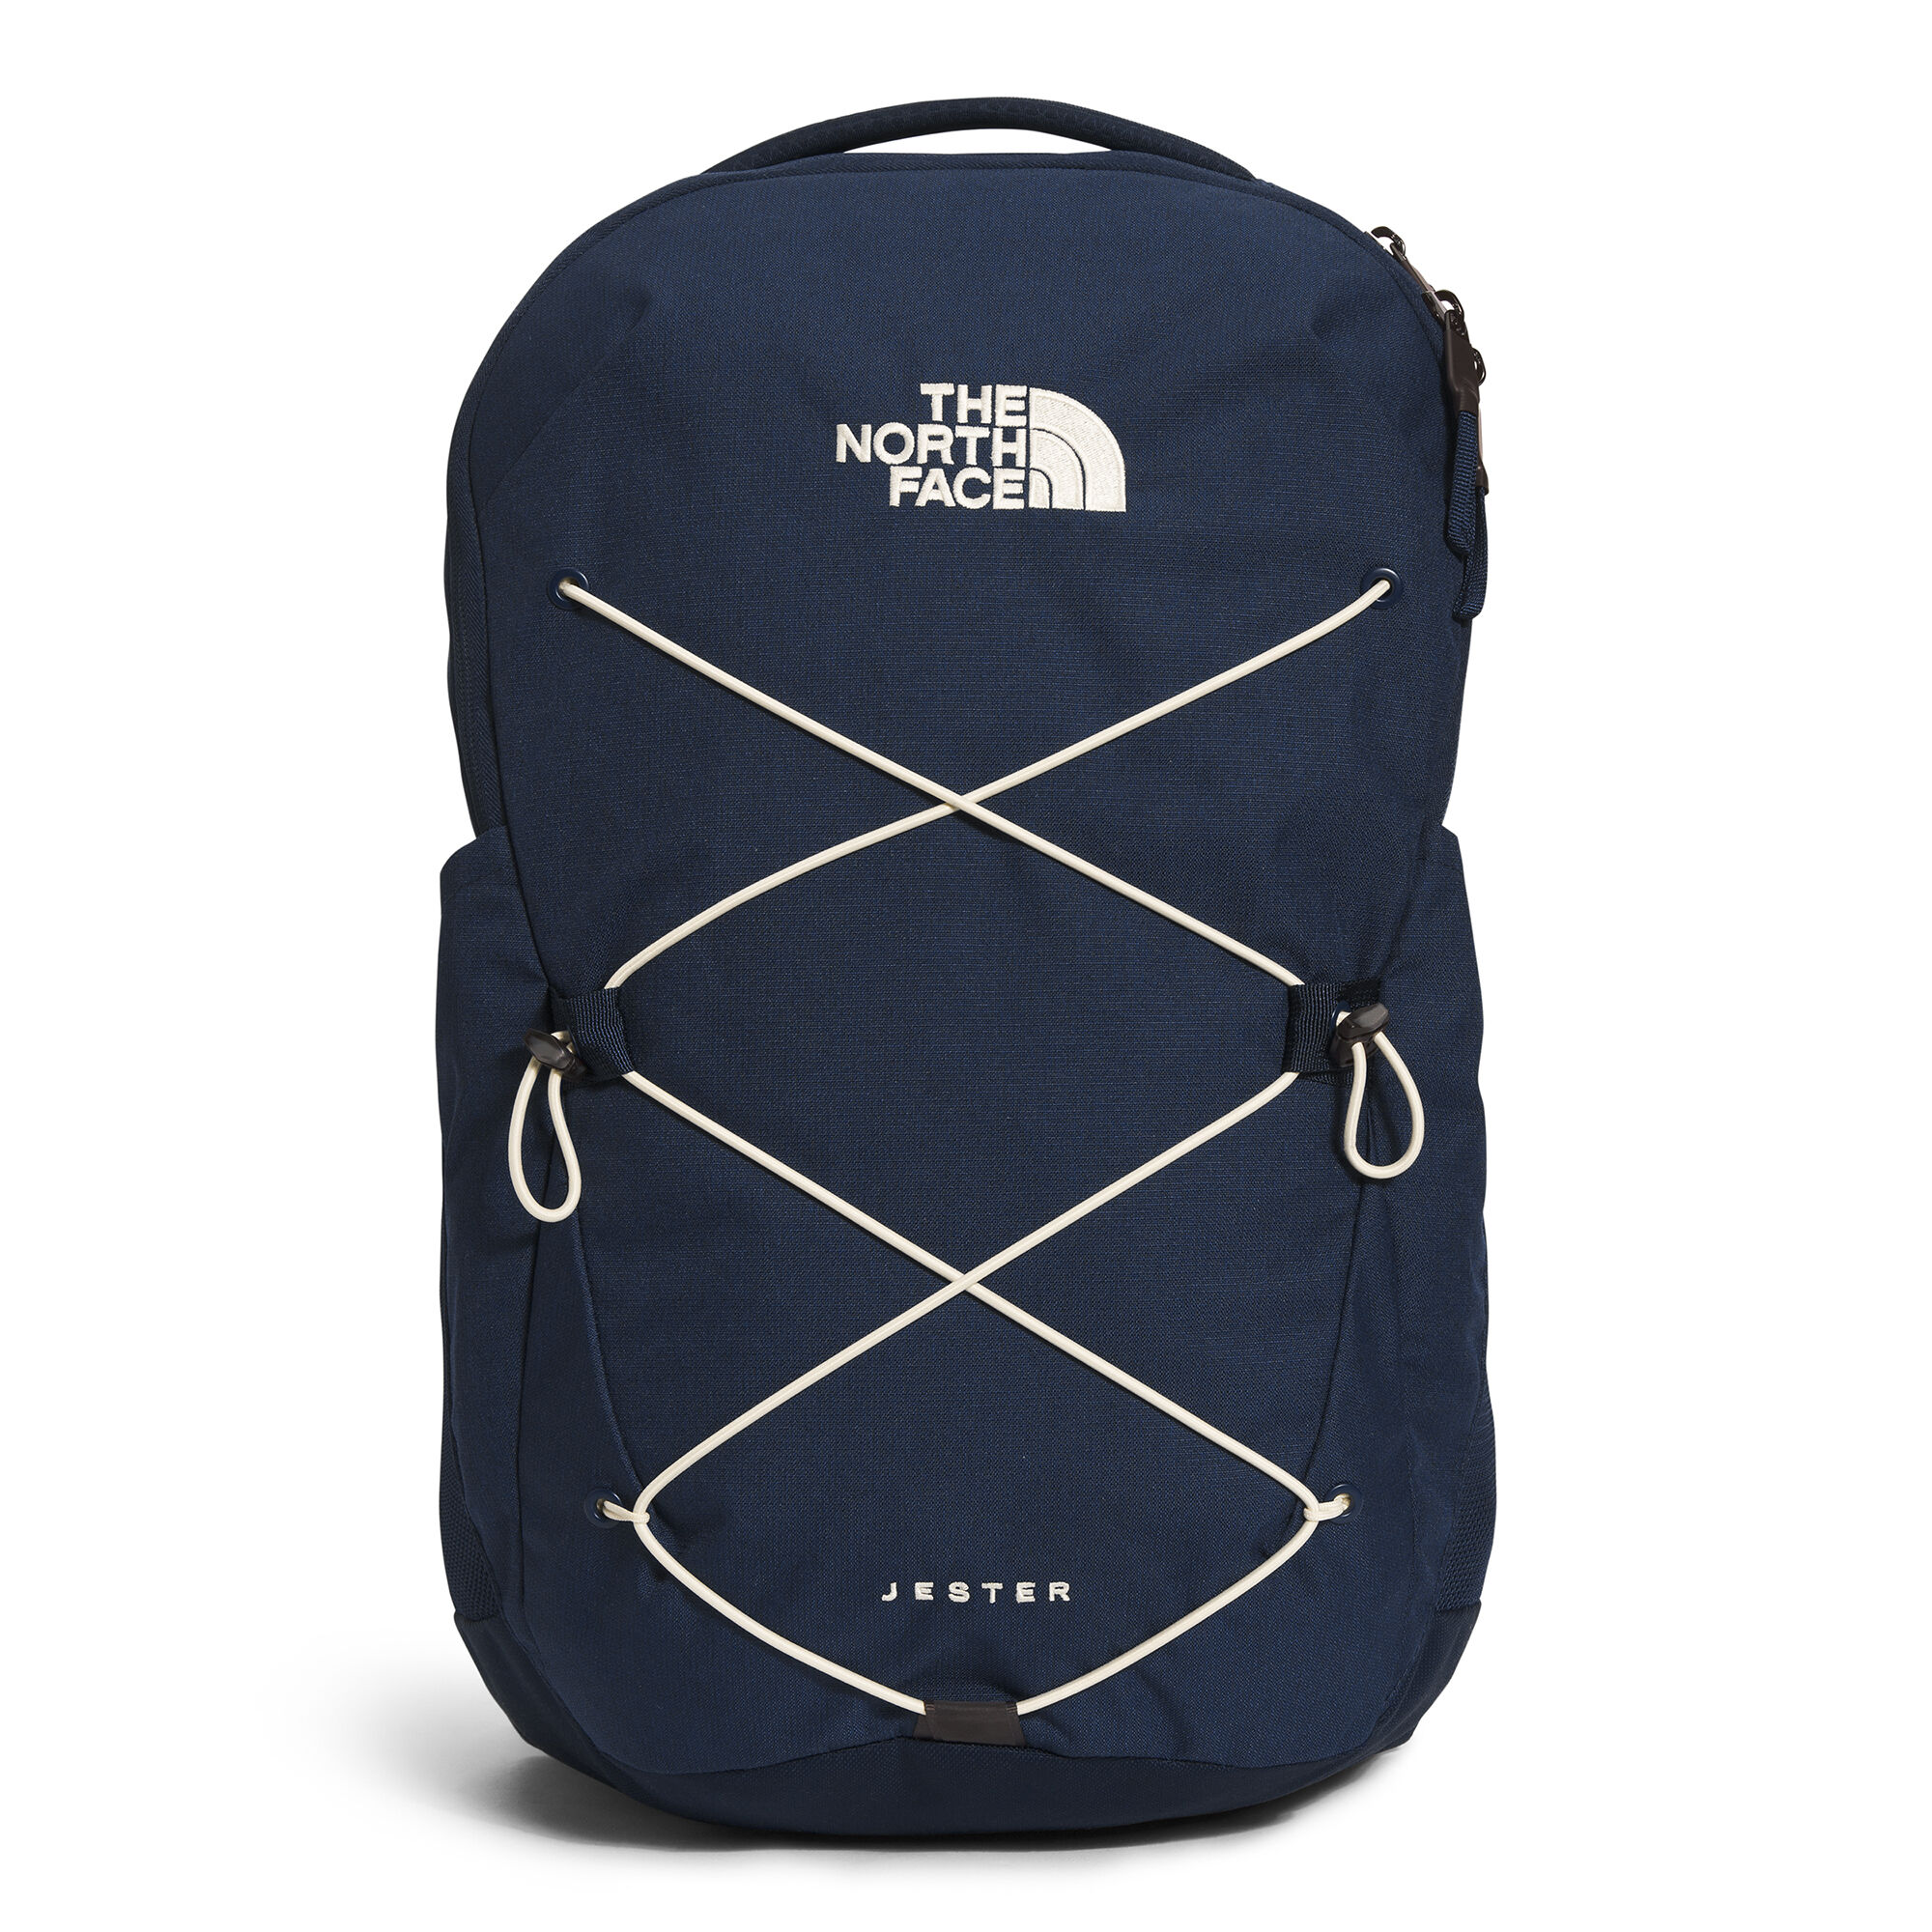 The North Face Men's Jester Backpack  - TNF Black Trail Glow Print/TNF B - Size: Large